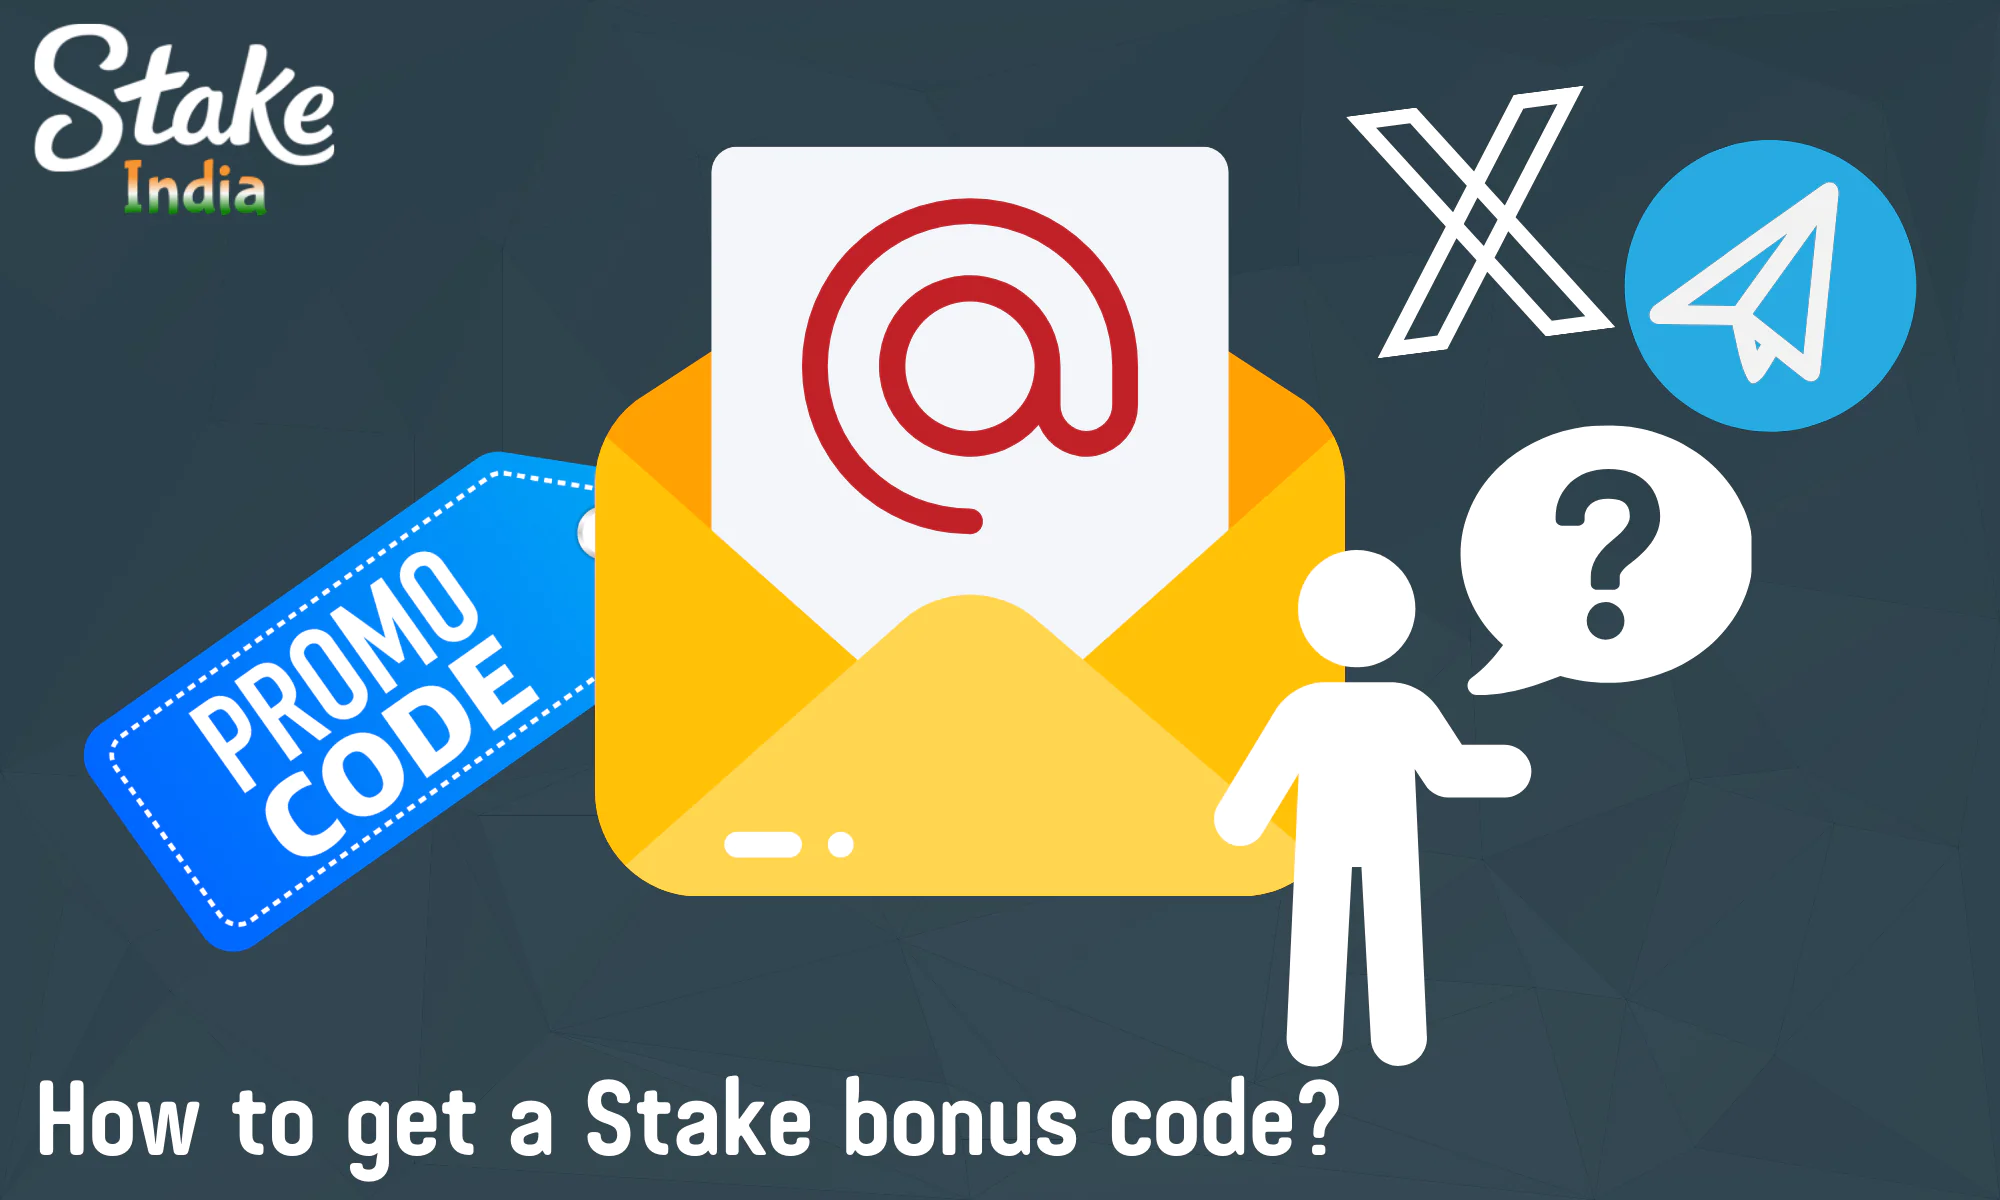 Instructions for receiving bonus codes from Stake casino